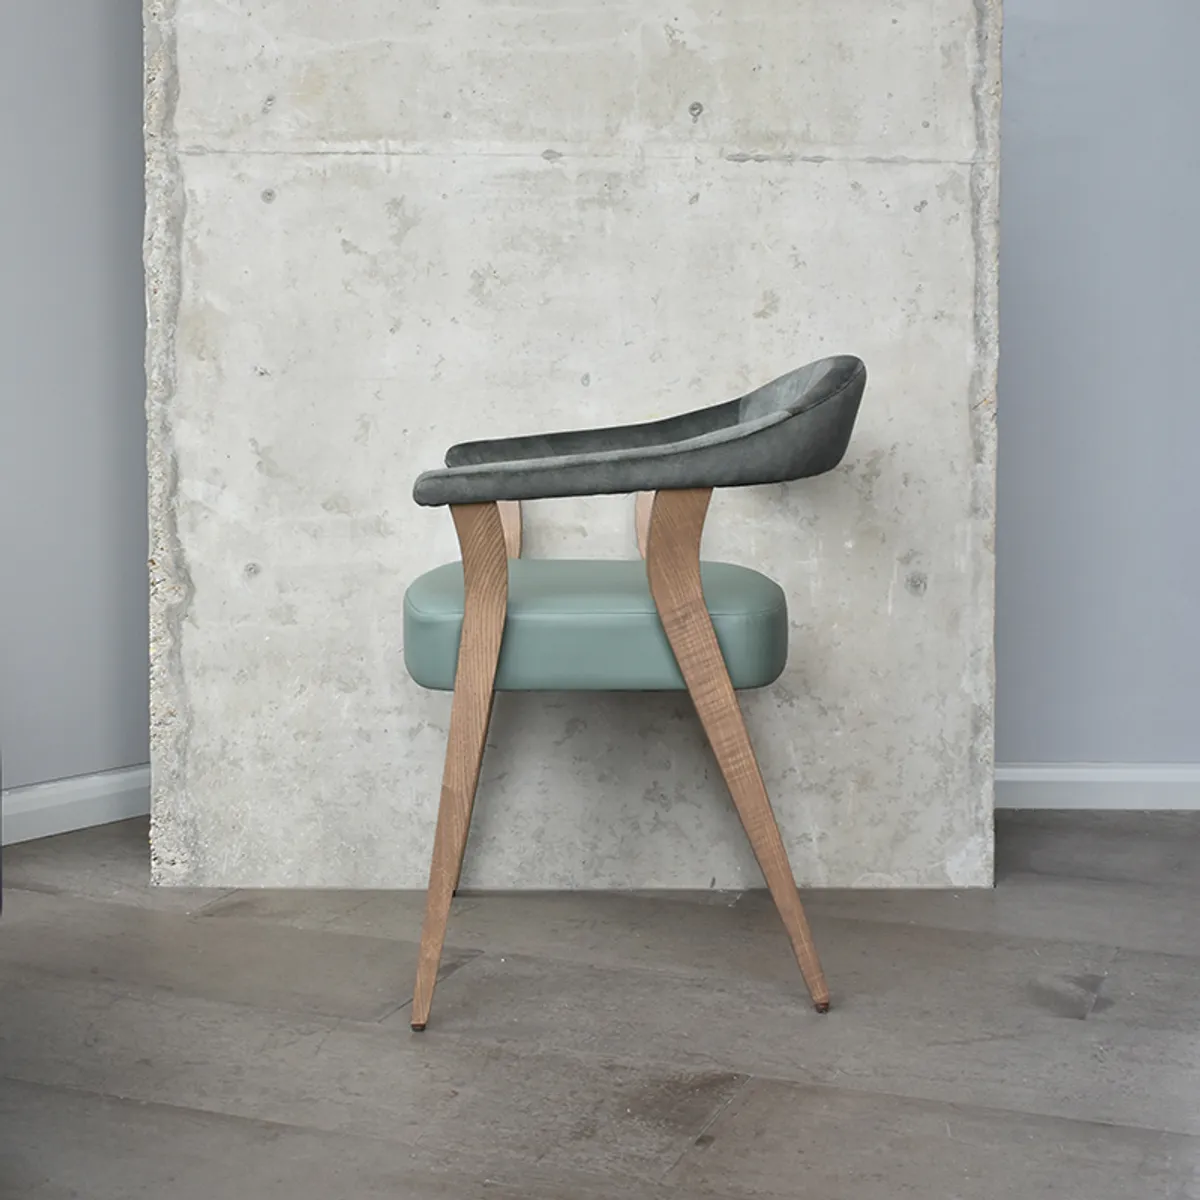 Nannini Armchair New Furniture From Milan 2019 By Inside Out Contracts 010